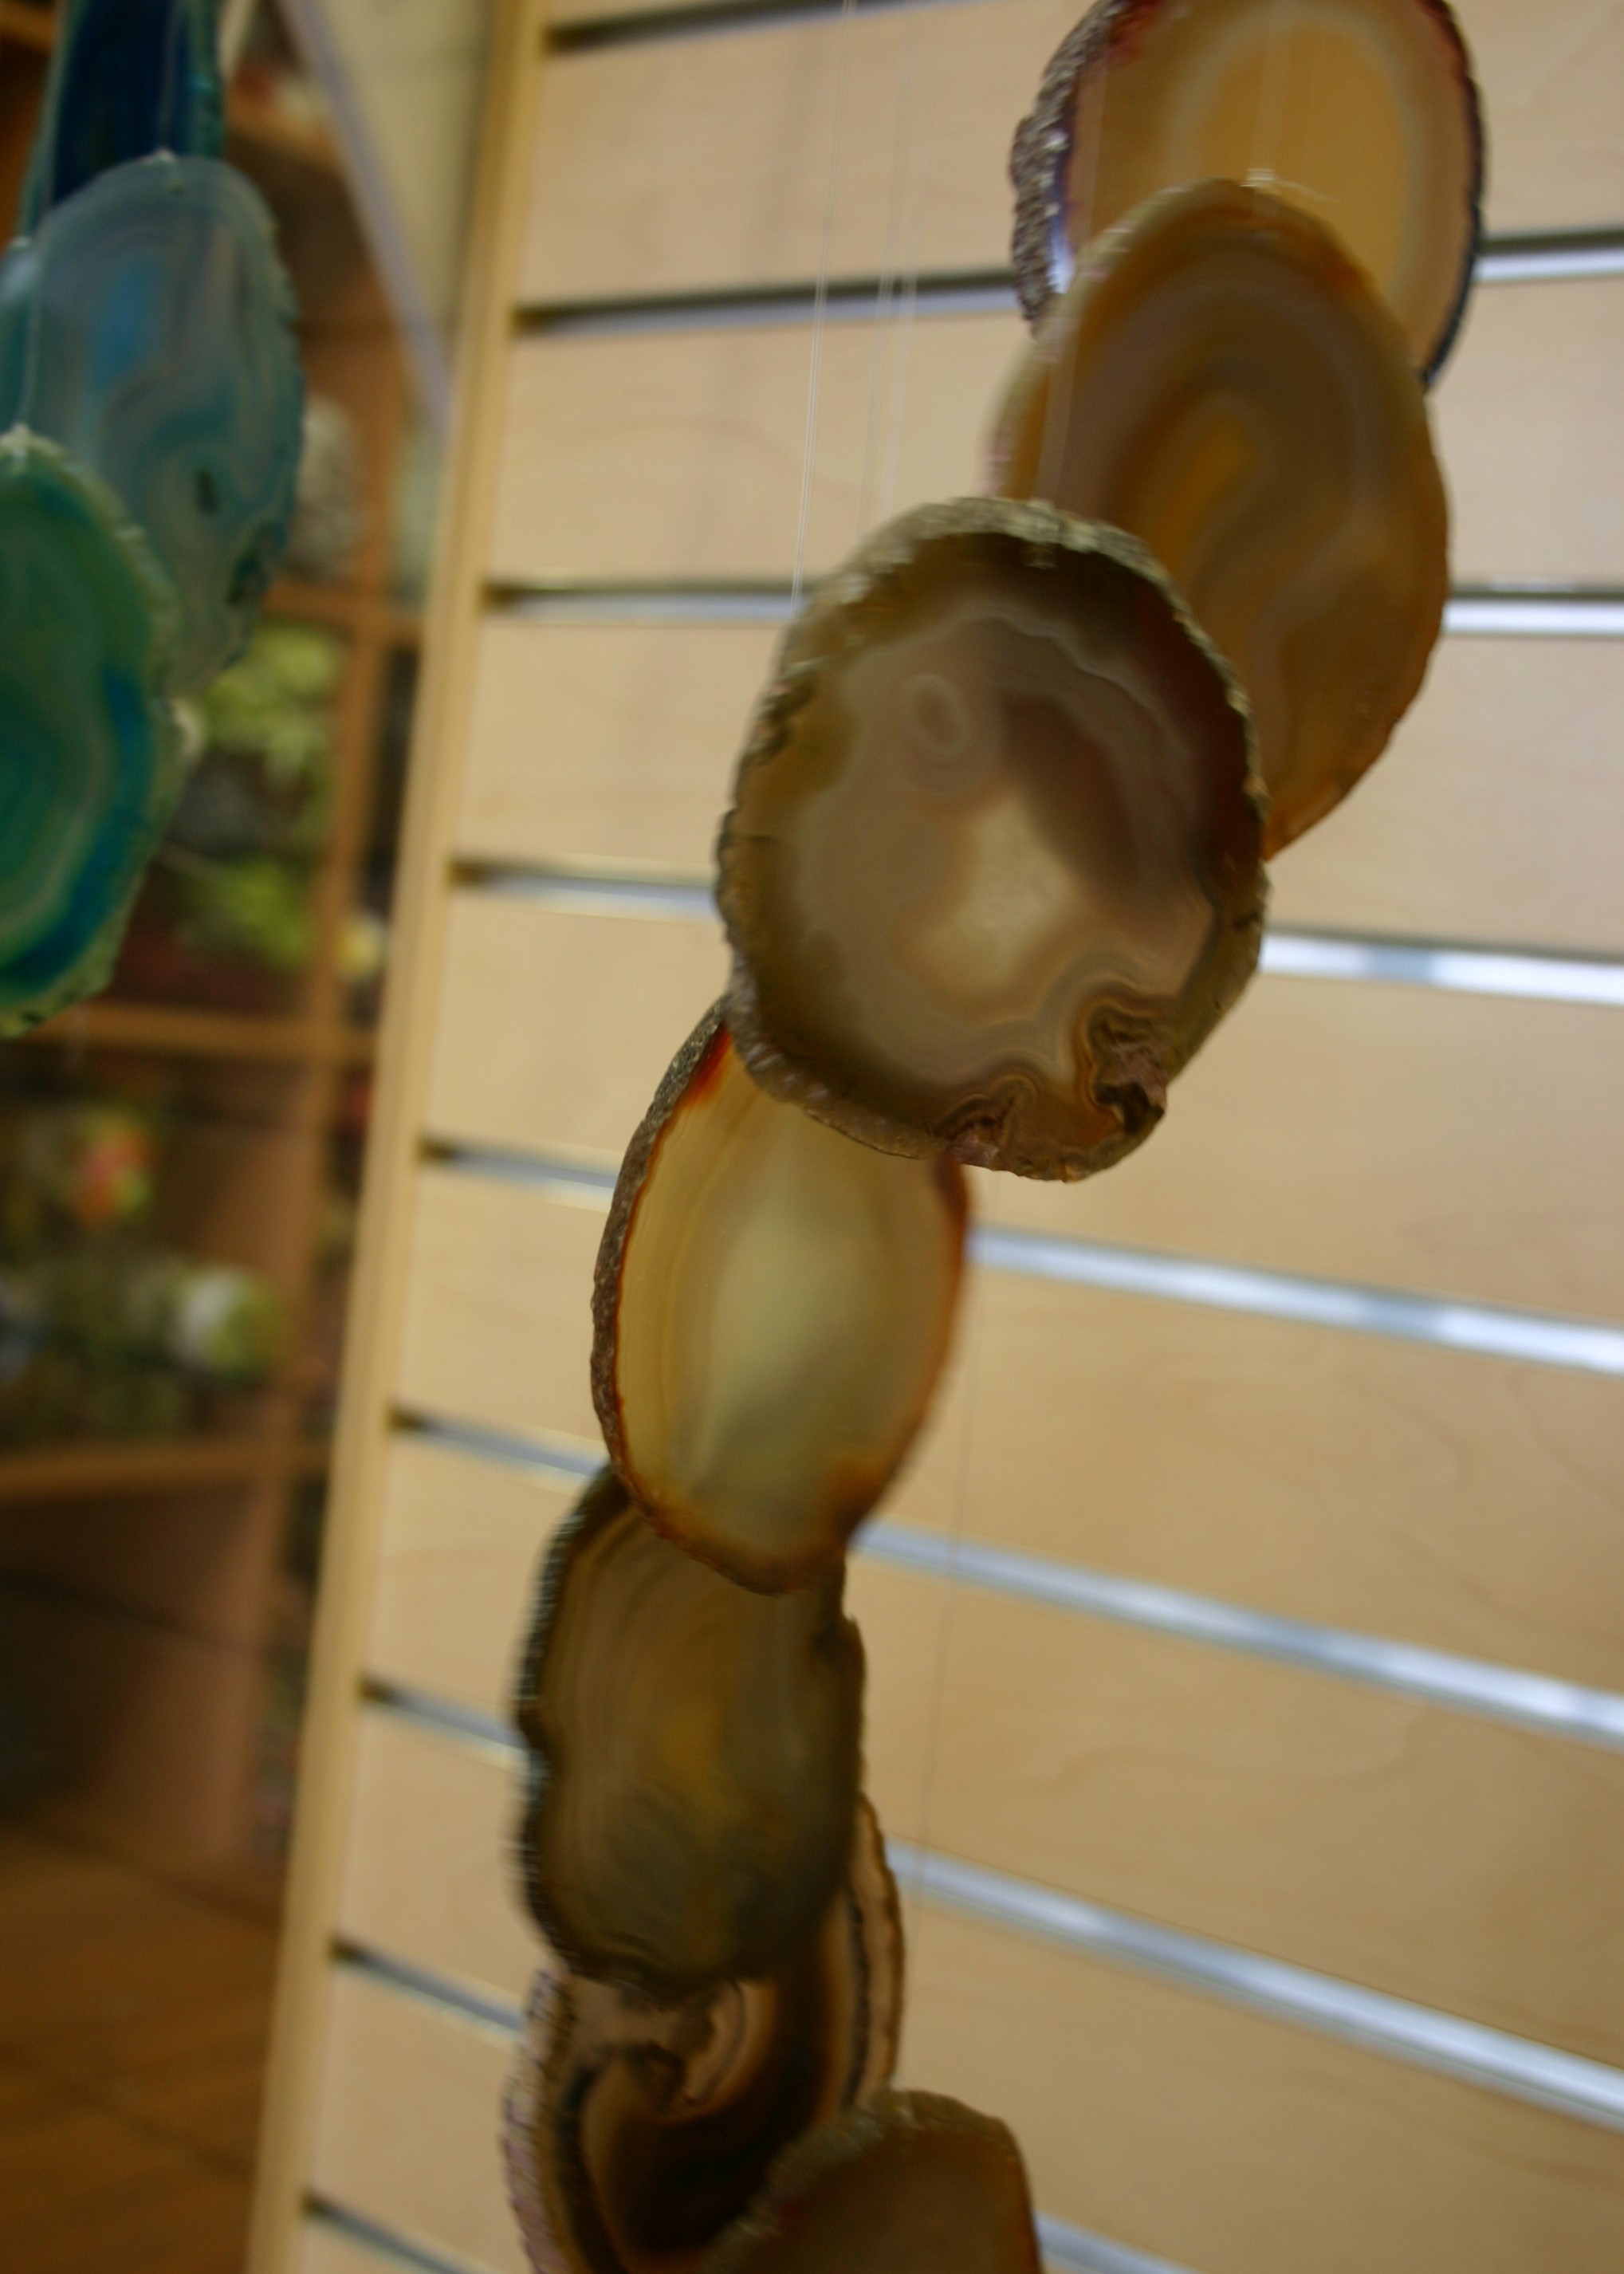 Wind Chime - Natural Agate Chimes in Natural Gray and Browns - 7 Agate Slivers